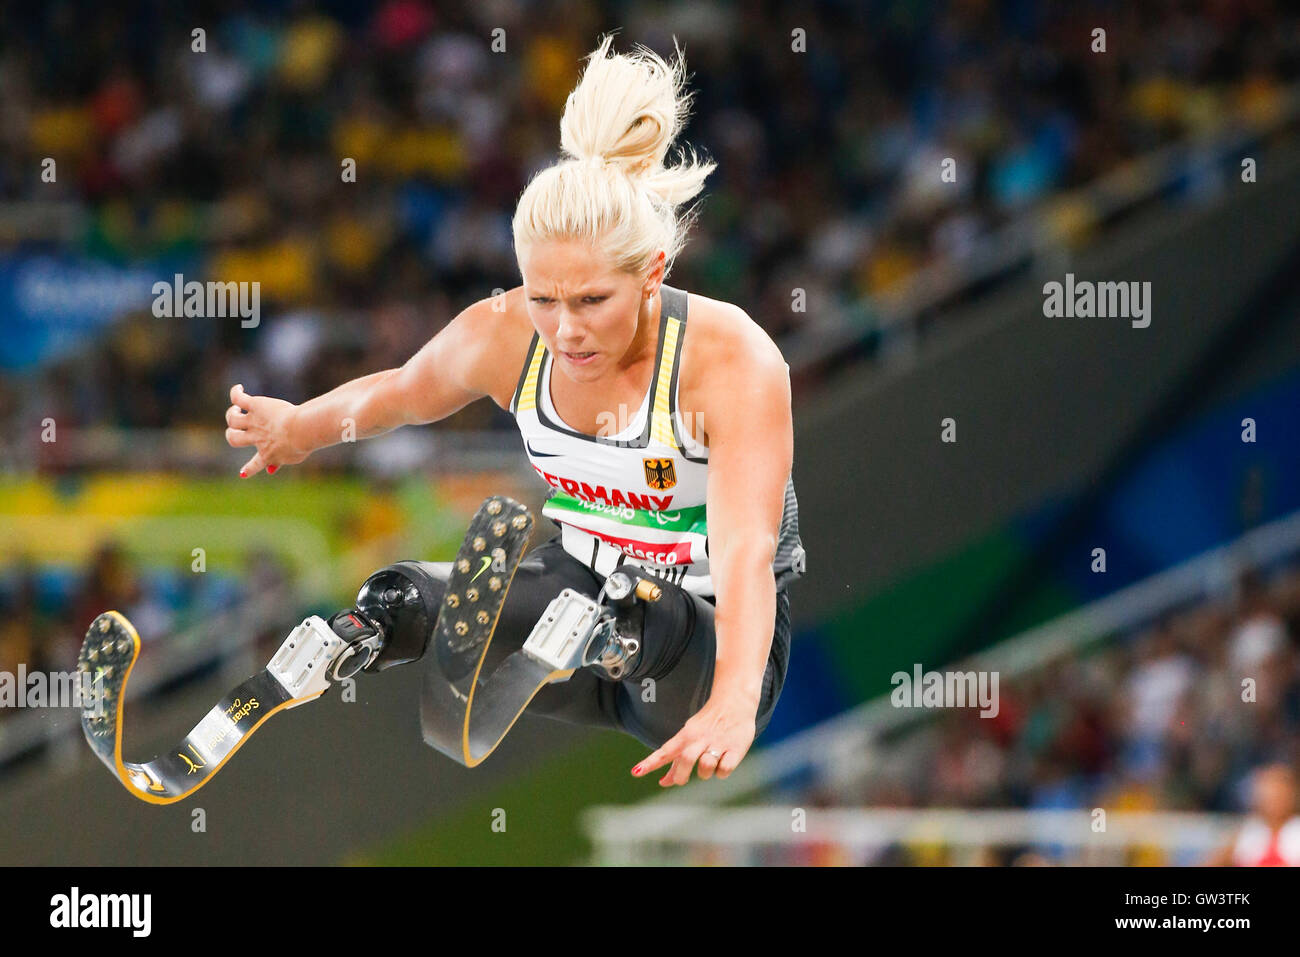 Rio De Janeiro, Brazil. 10th Sep, 2016. Paralympic Games Rio 2016 - Women's long Jump - T42 Vanessa Low (GER) competes in the women's long jump final at Stadio Olimpico João Havelange in Rio de Janeiro, Brazil. Credit:  Mauro Ujetto/Pacific Press/Alamy Live News Stock Photo